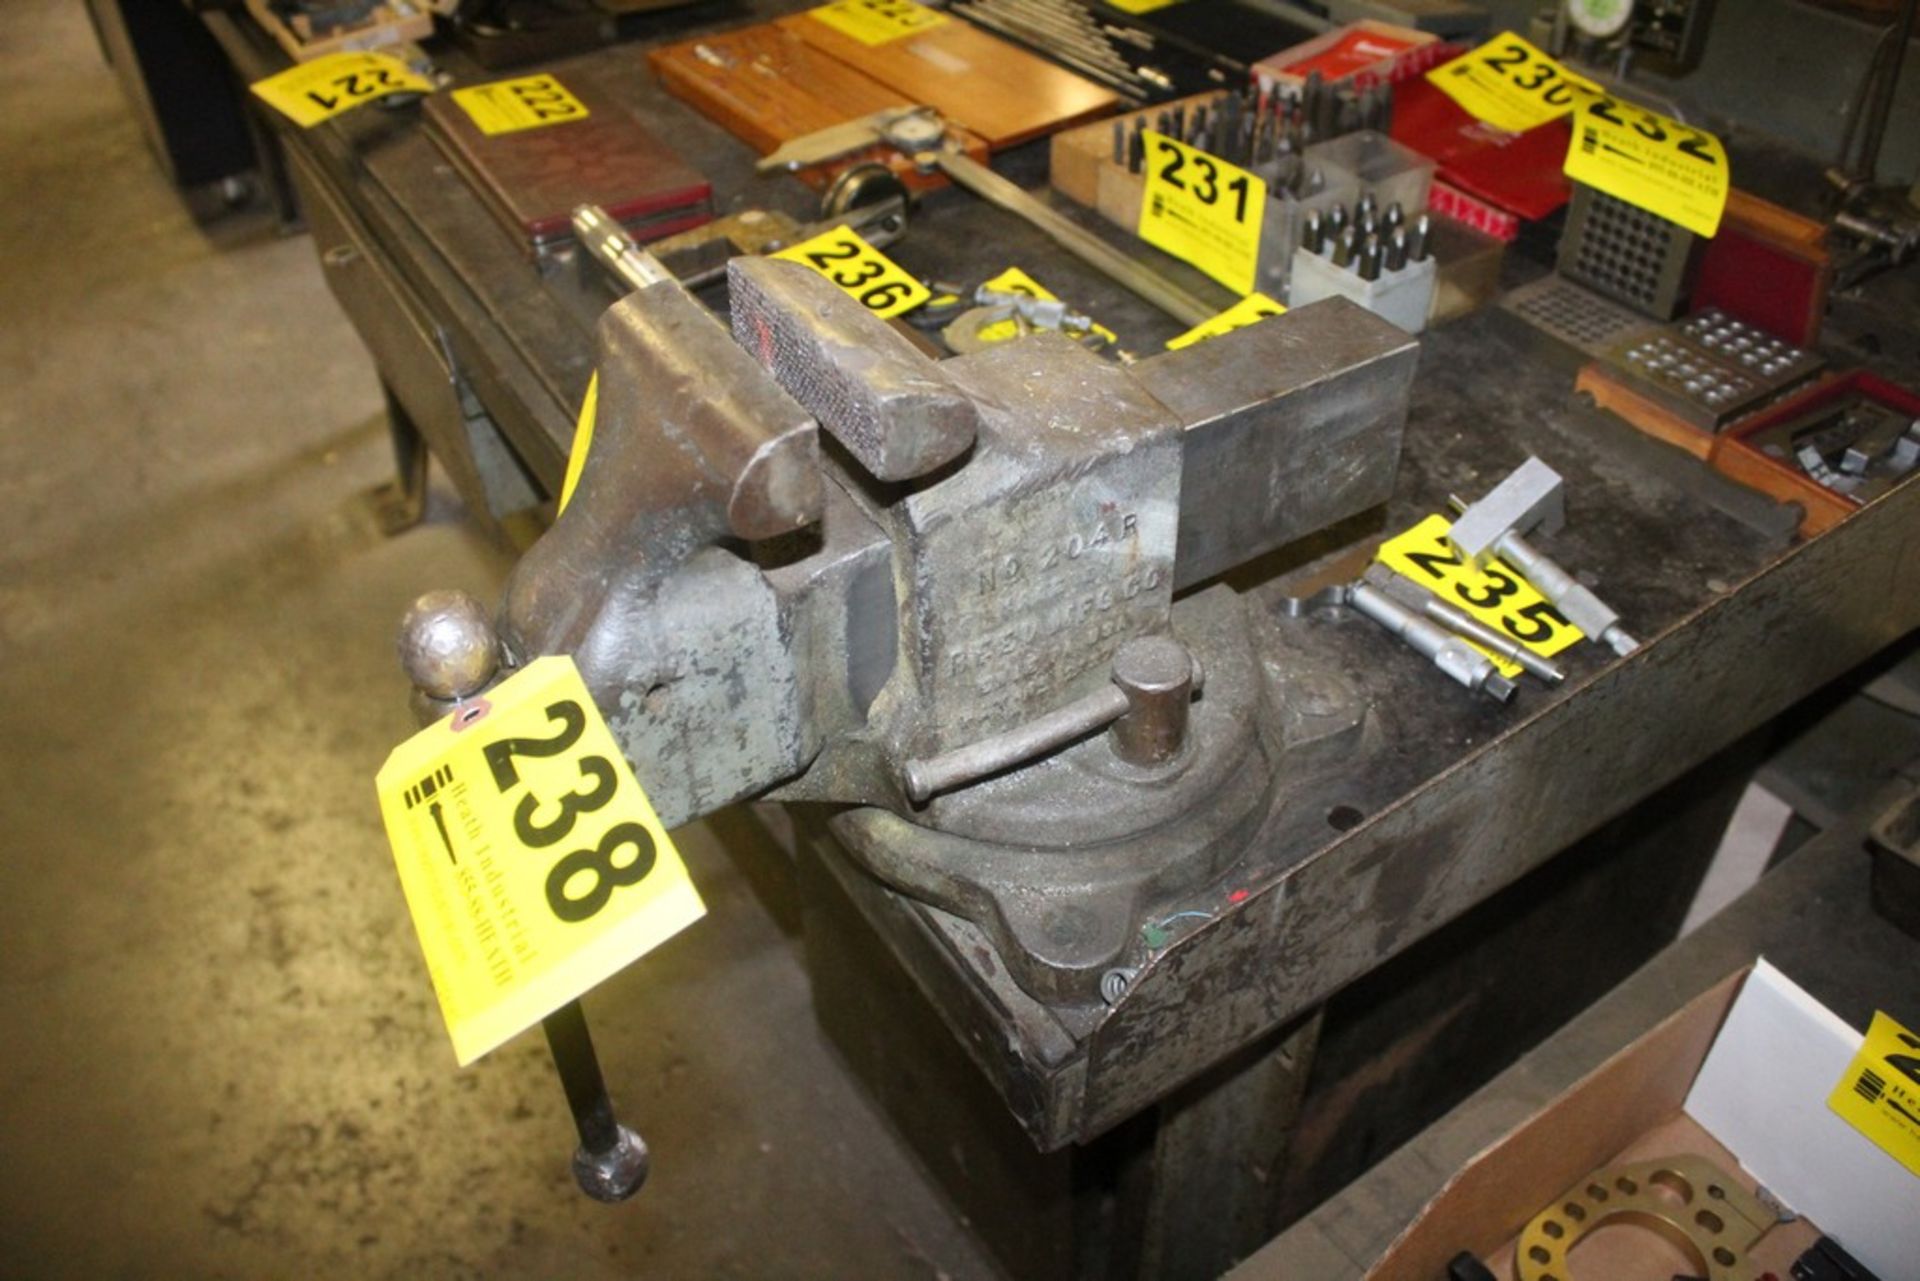 REED 4" SWIVEL BENCH VISE WITH 72" X 36" X 34" STEEL WORK BENCH - Image 2 of 2